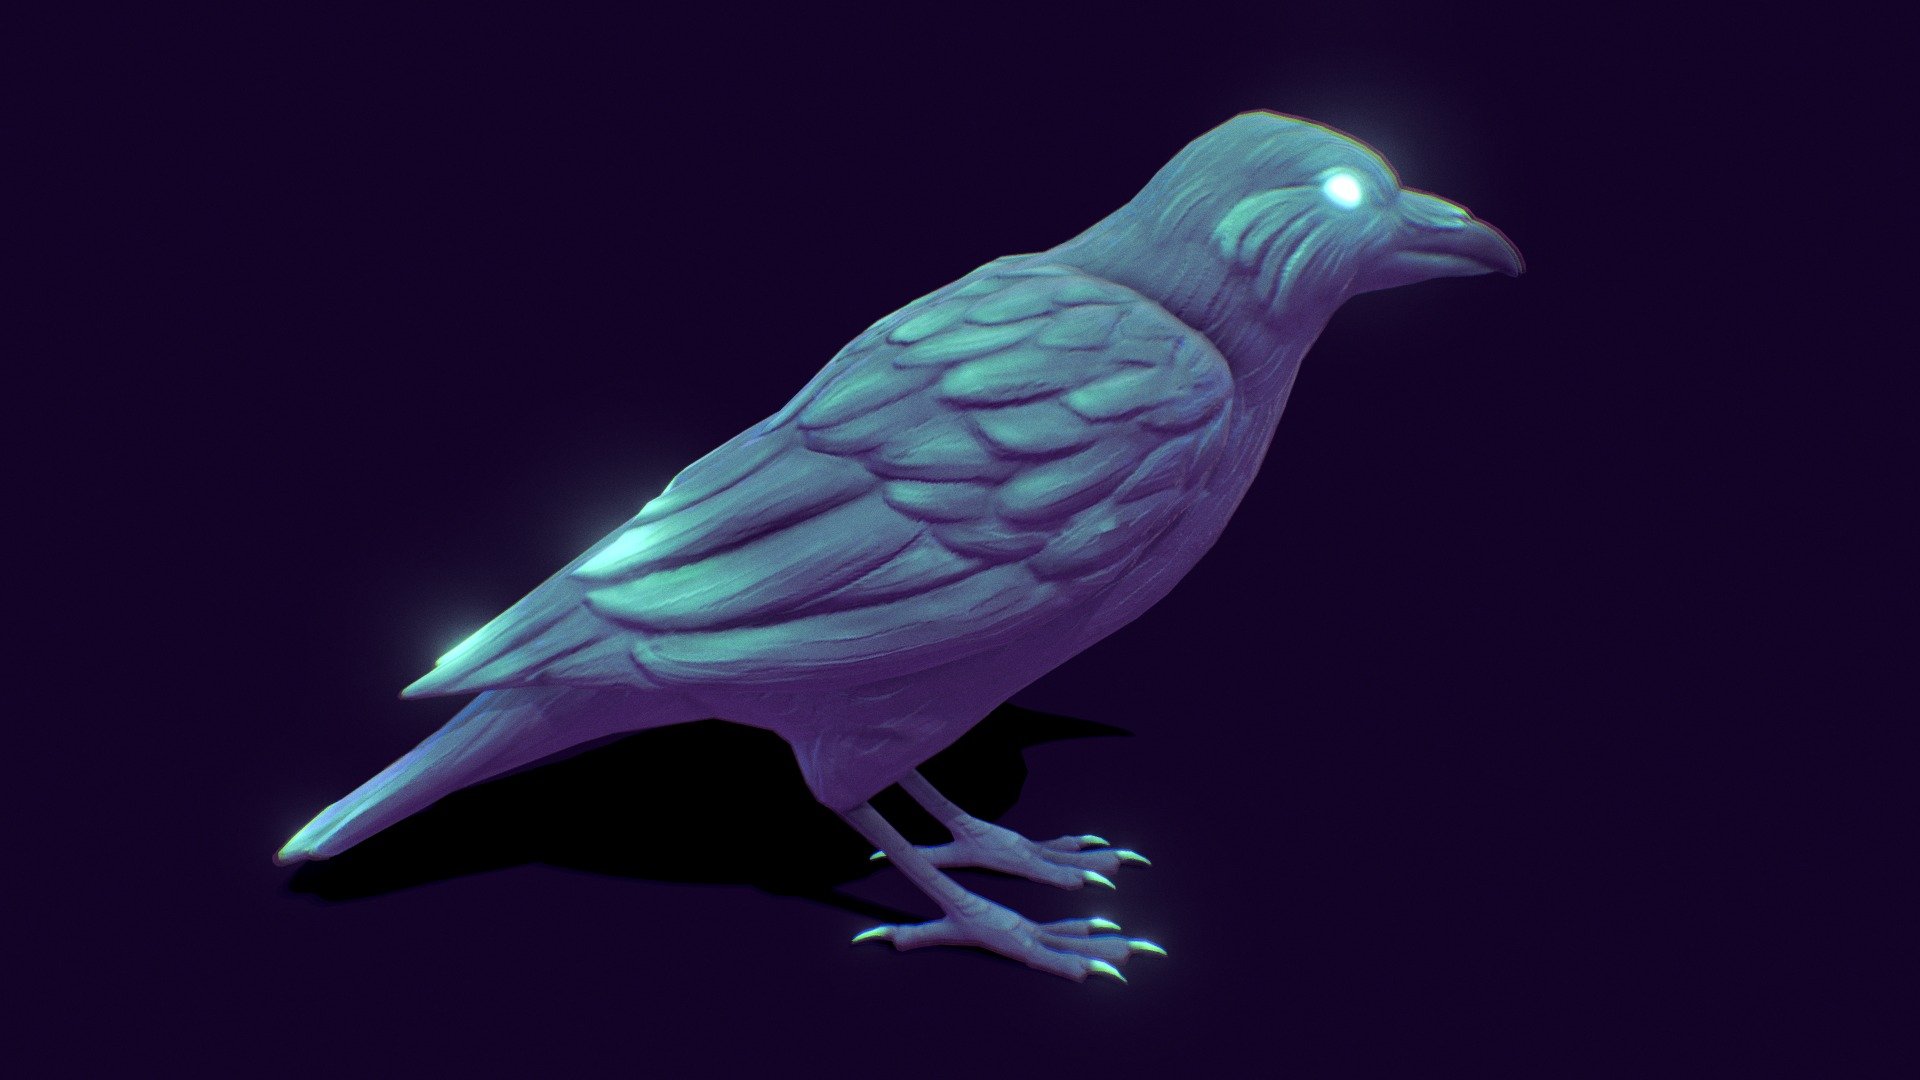 first time sculpting, and first time using blender! originally meant to be a quick exercise that i ended up spending a bit too much time on. it's far from perfect but i learned a lot with this little model! - crow - 3D model by camilleotto 3d model